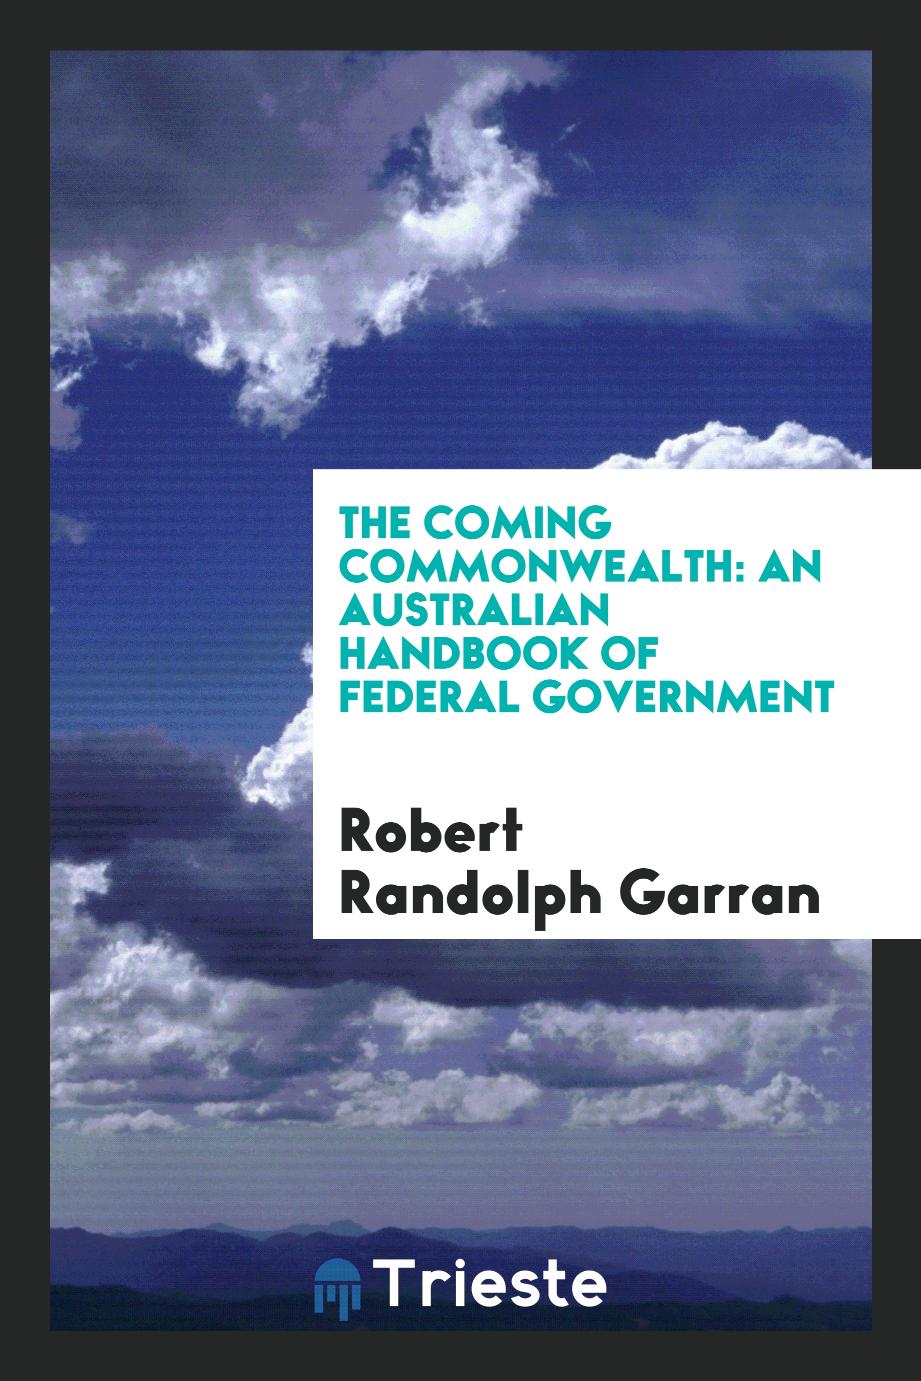 The Coming Commonwealth: An Australian Handbook of Federal Government